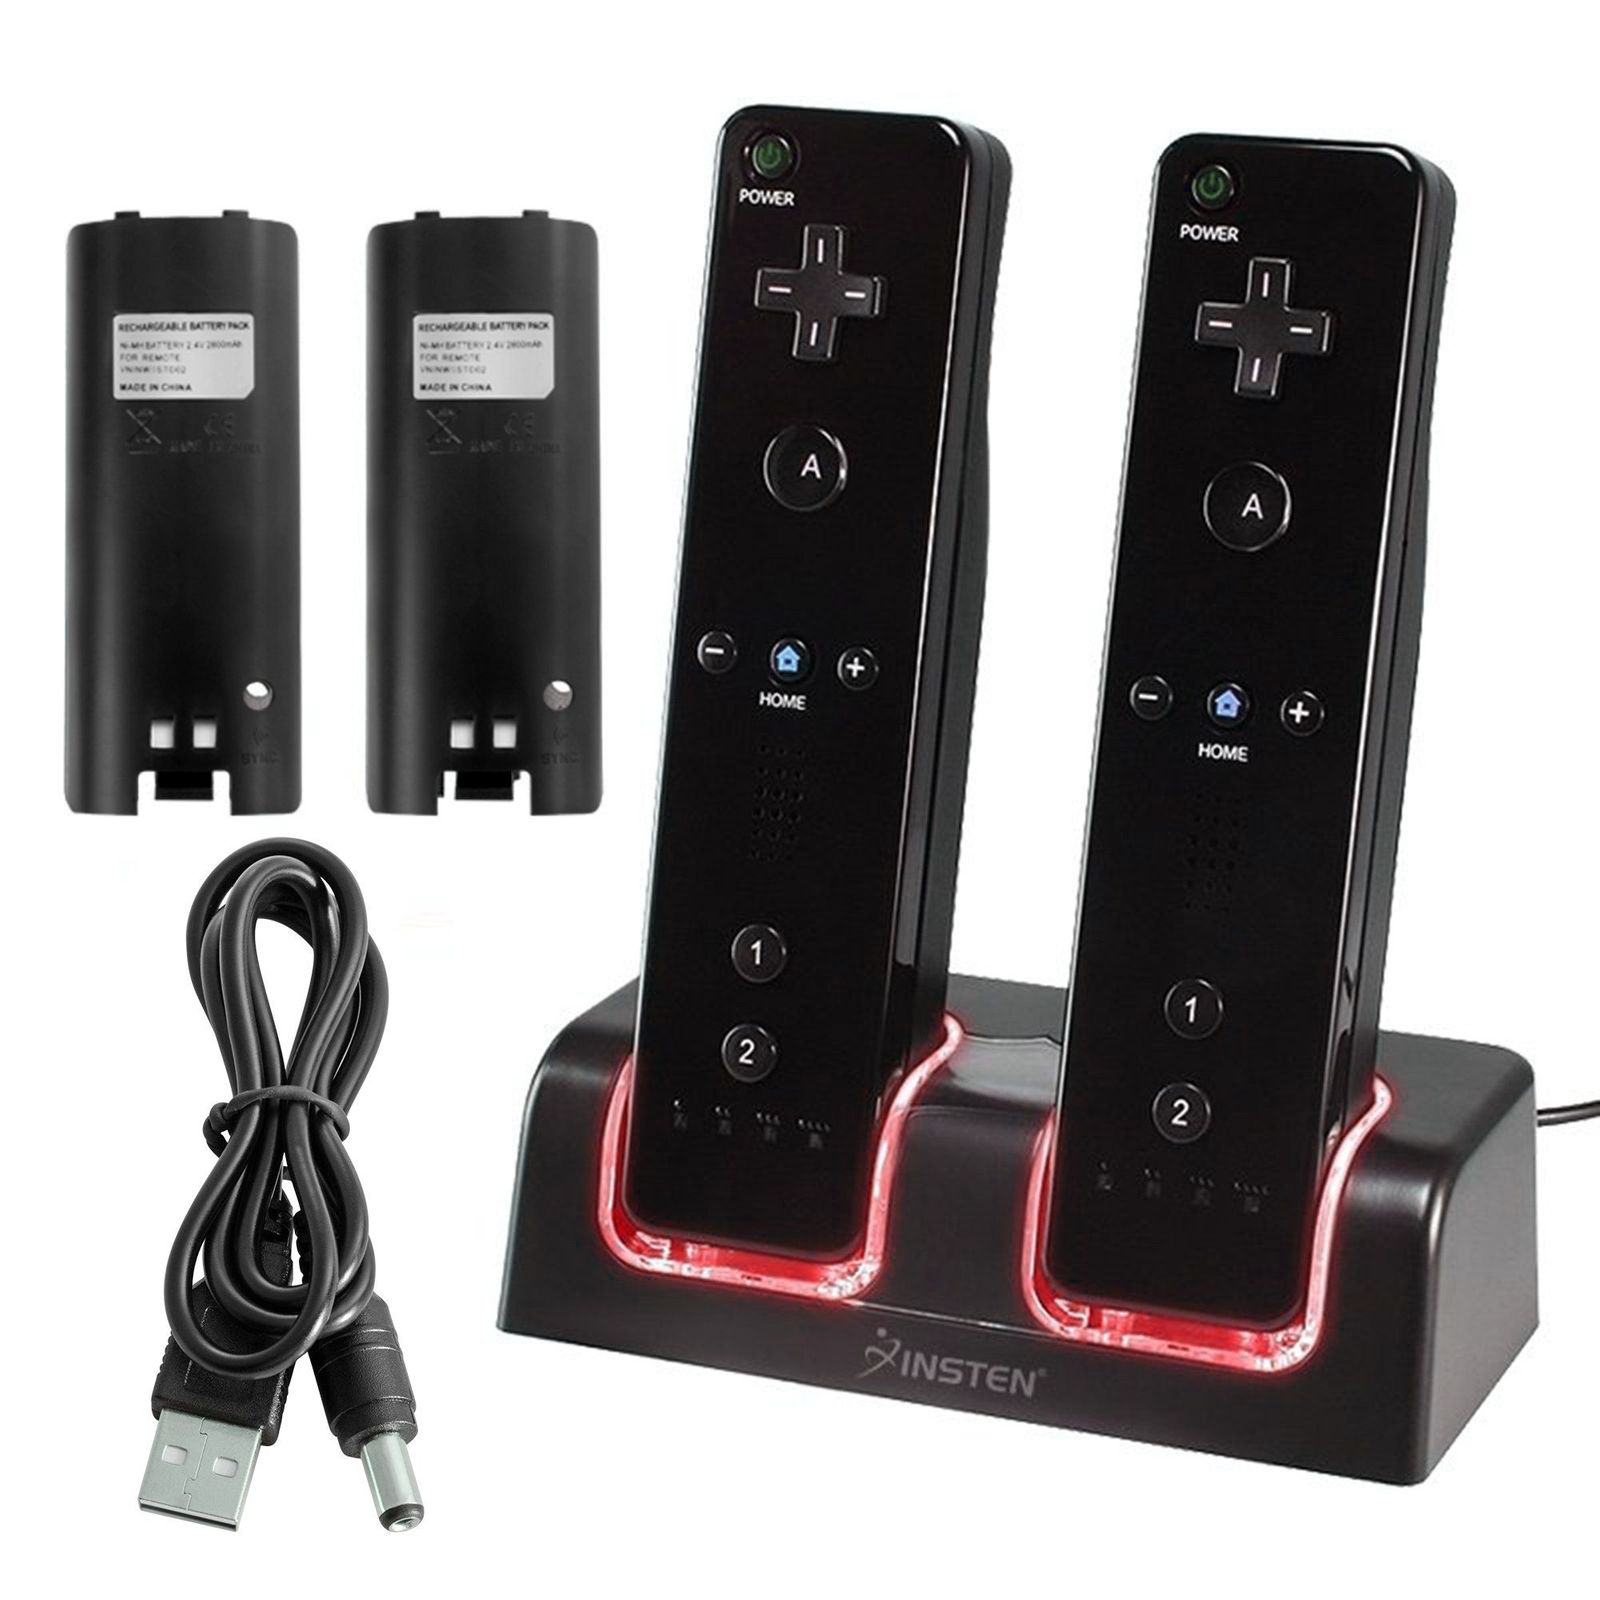 For Nintedo Wii Dual Remote Controller Charger Charging Dock Station + 2x Rechargeable Replacement Battery Pack Accessories Bundle for Wii / Wii U Controllers by Insten, Black - image 1 of 8